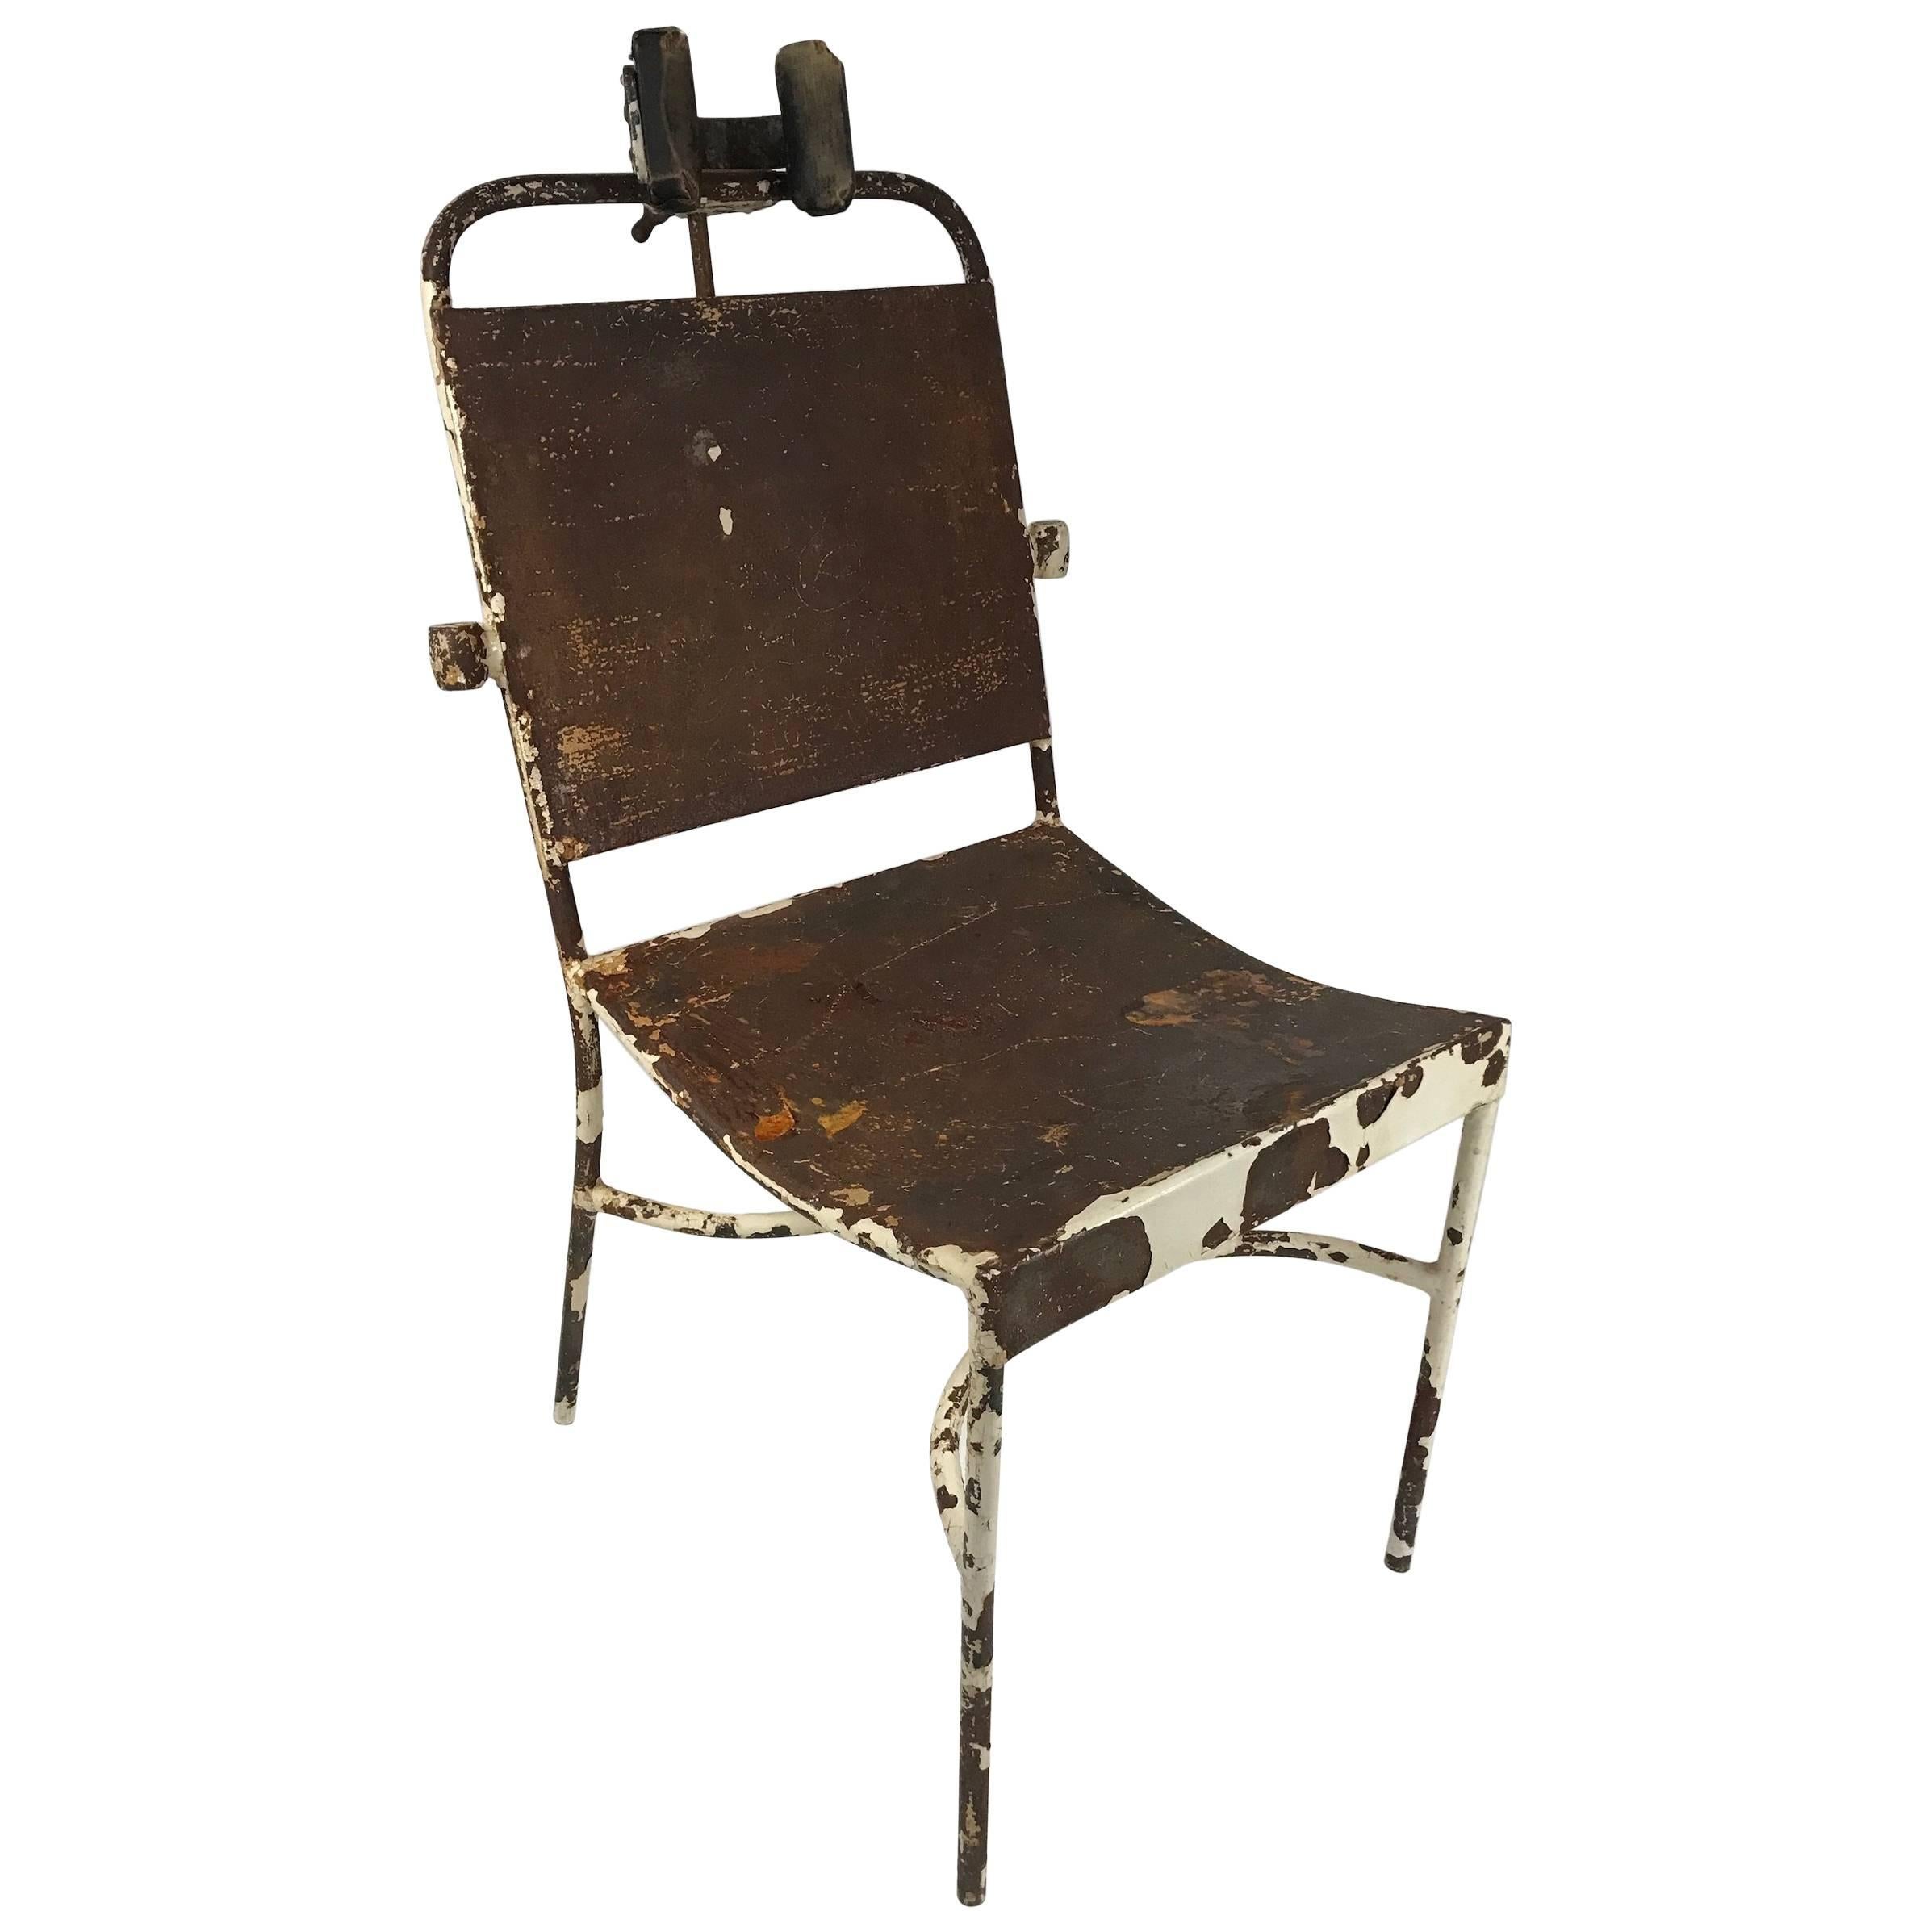 Antique Iron Medical Chair